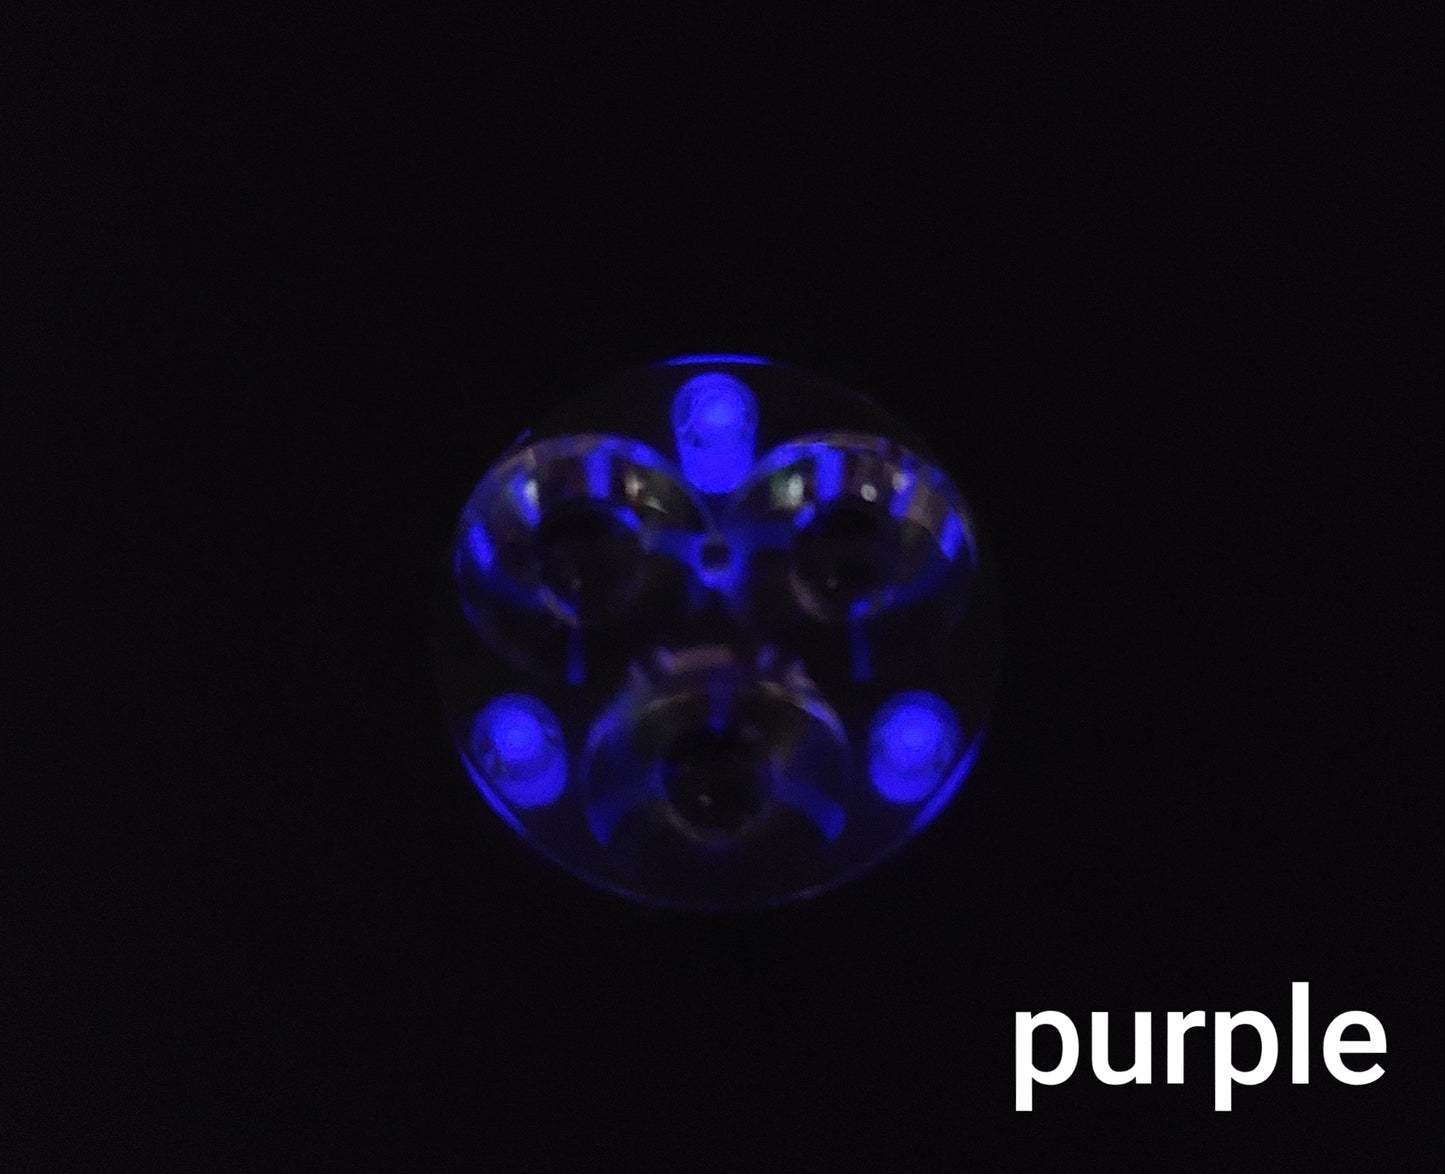 Carclo 10511 10507 Drilled Optics 20mm 1.5x6mm For Tritium or Glow Tubes 10507 W PURPLE GLOW TUBES INSTALLED